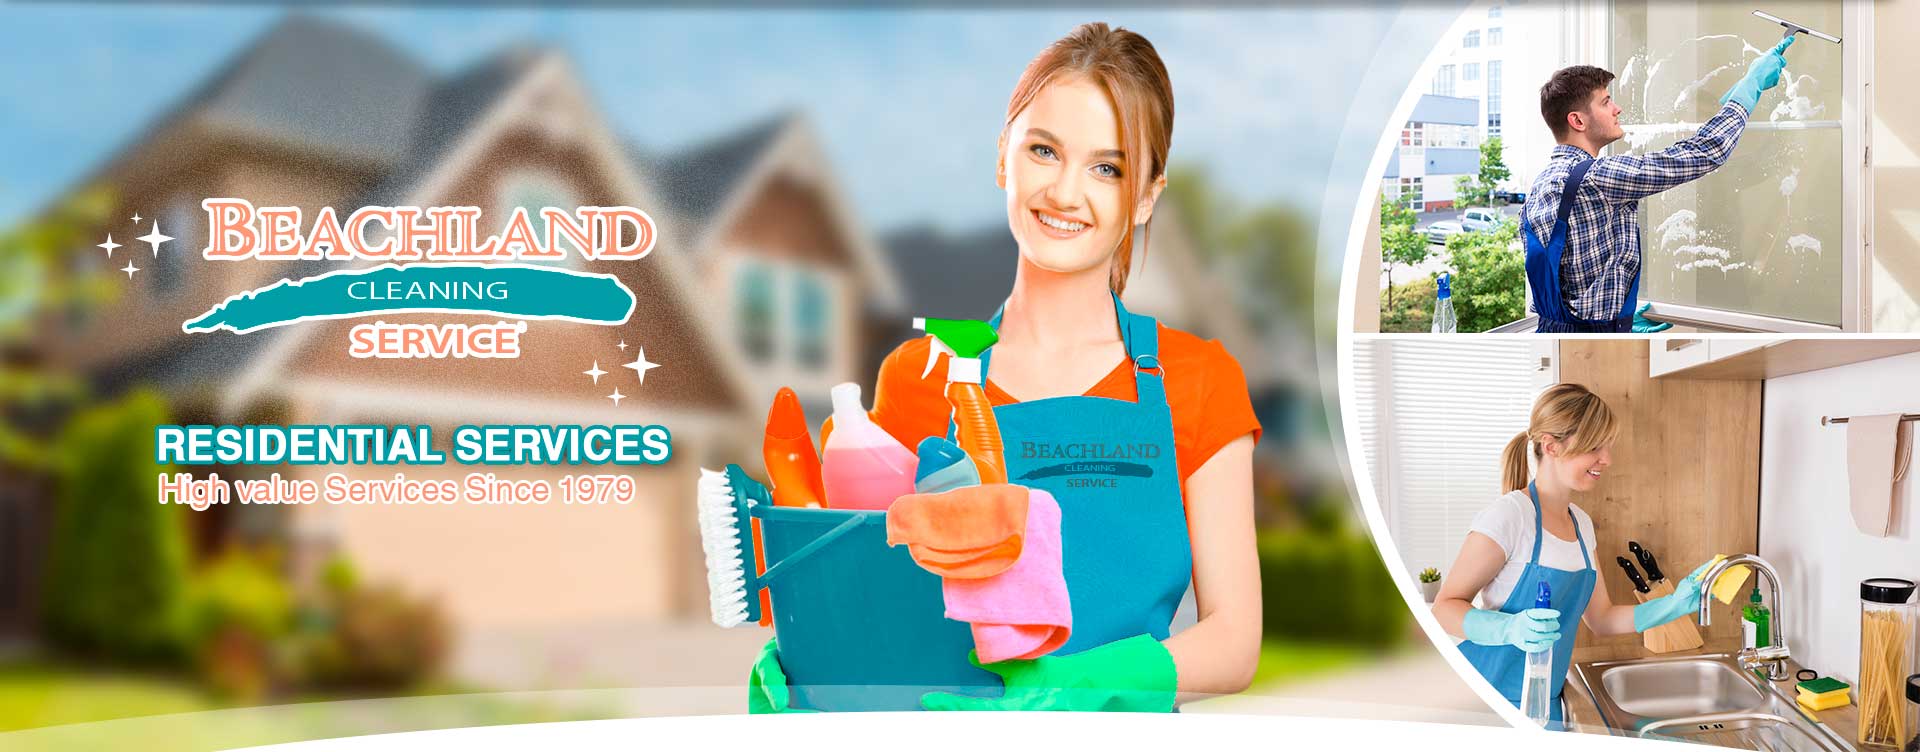 Janitorial Services in Hobe Sound